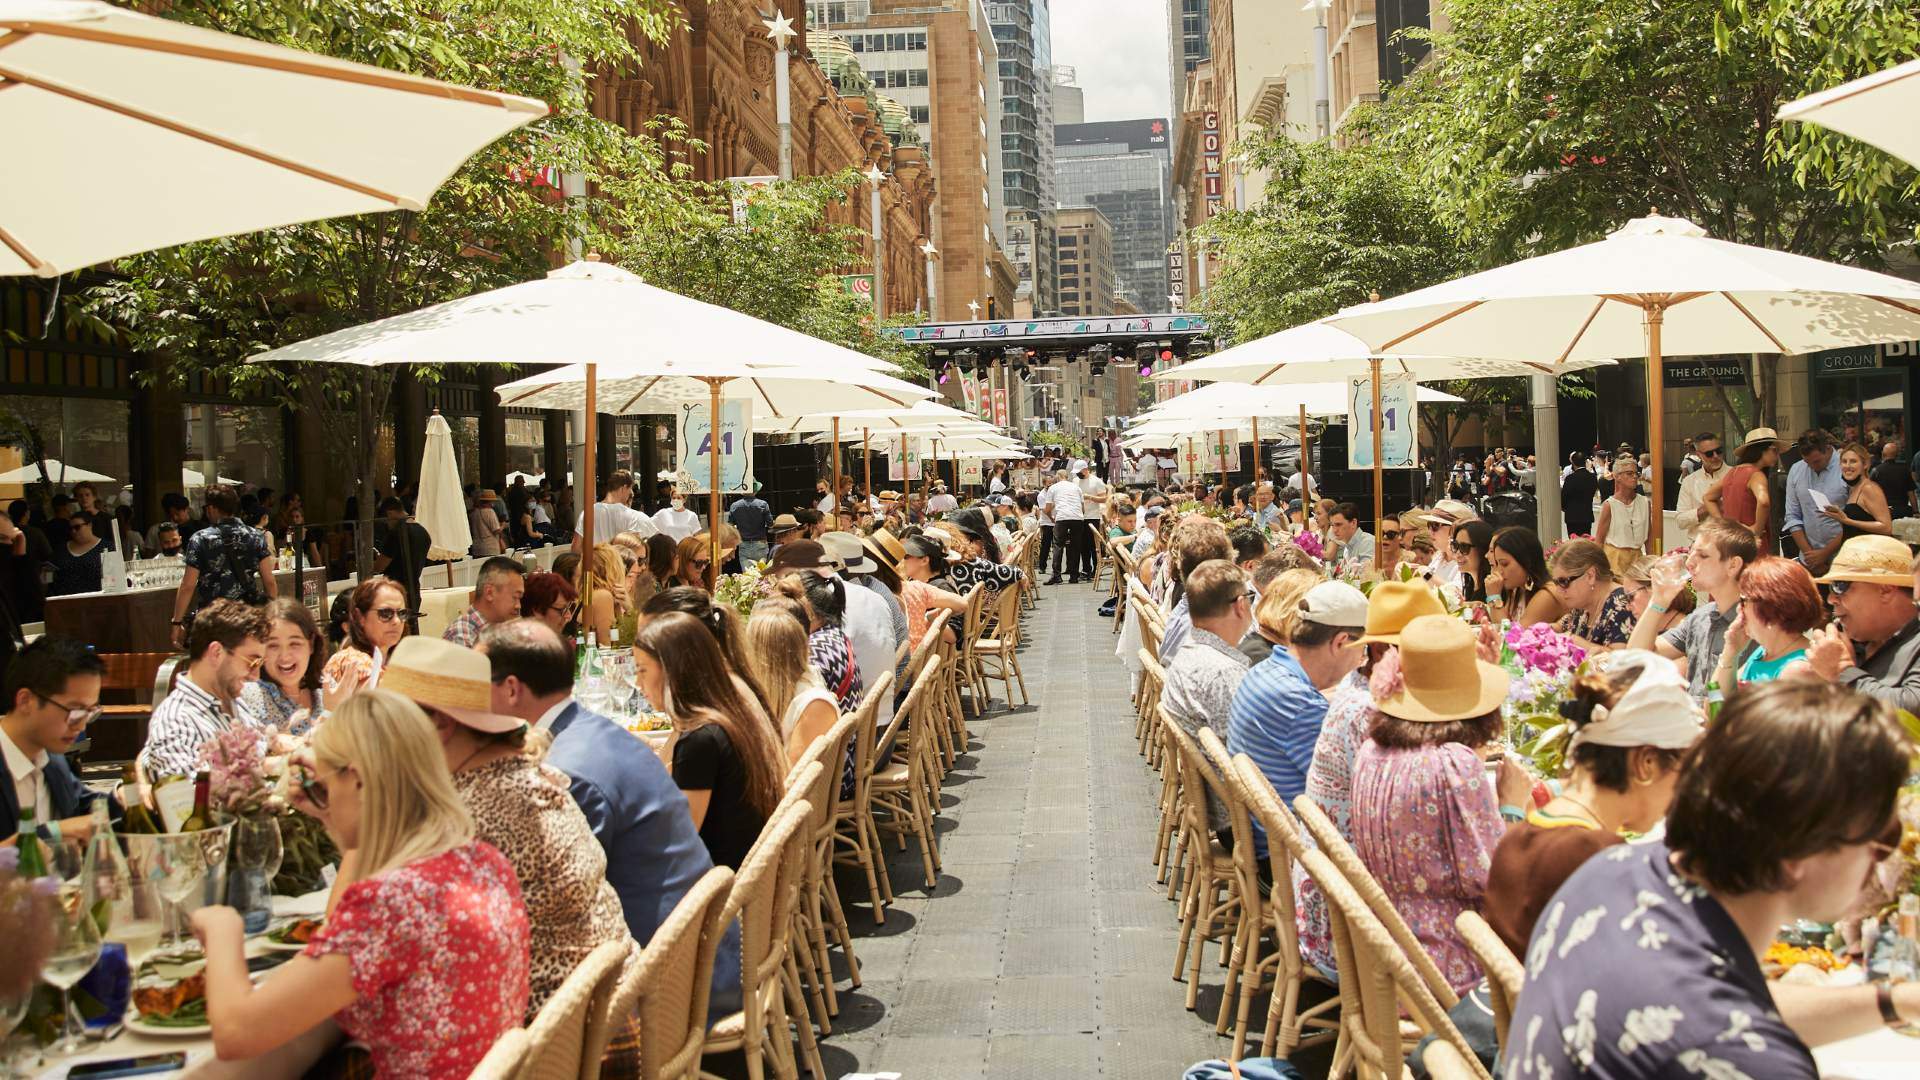 Open for Lunch Is Shutting George Street for Another Al Fresco Feast — This Time with the Ministry of Sound Orchestra